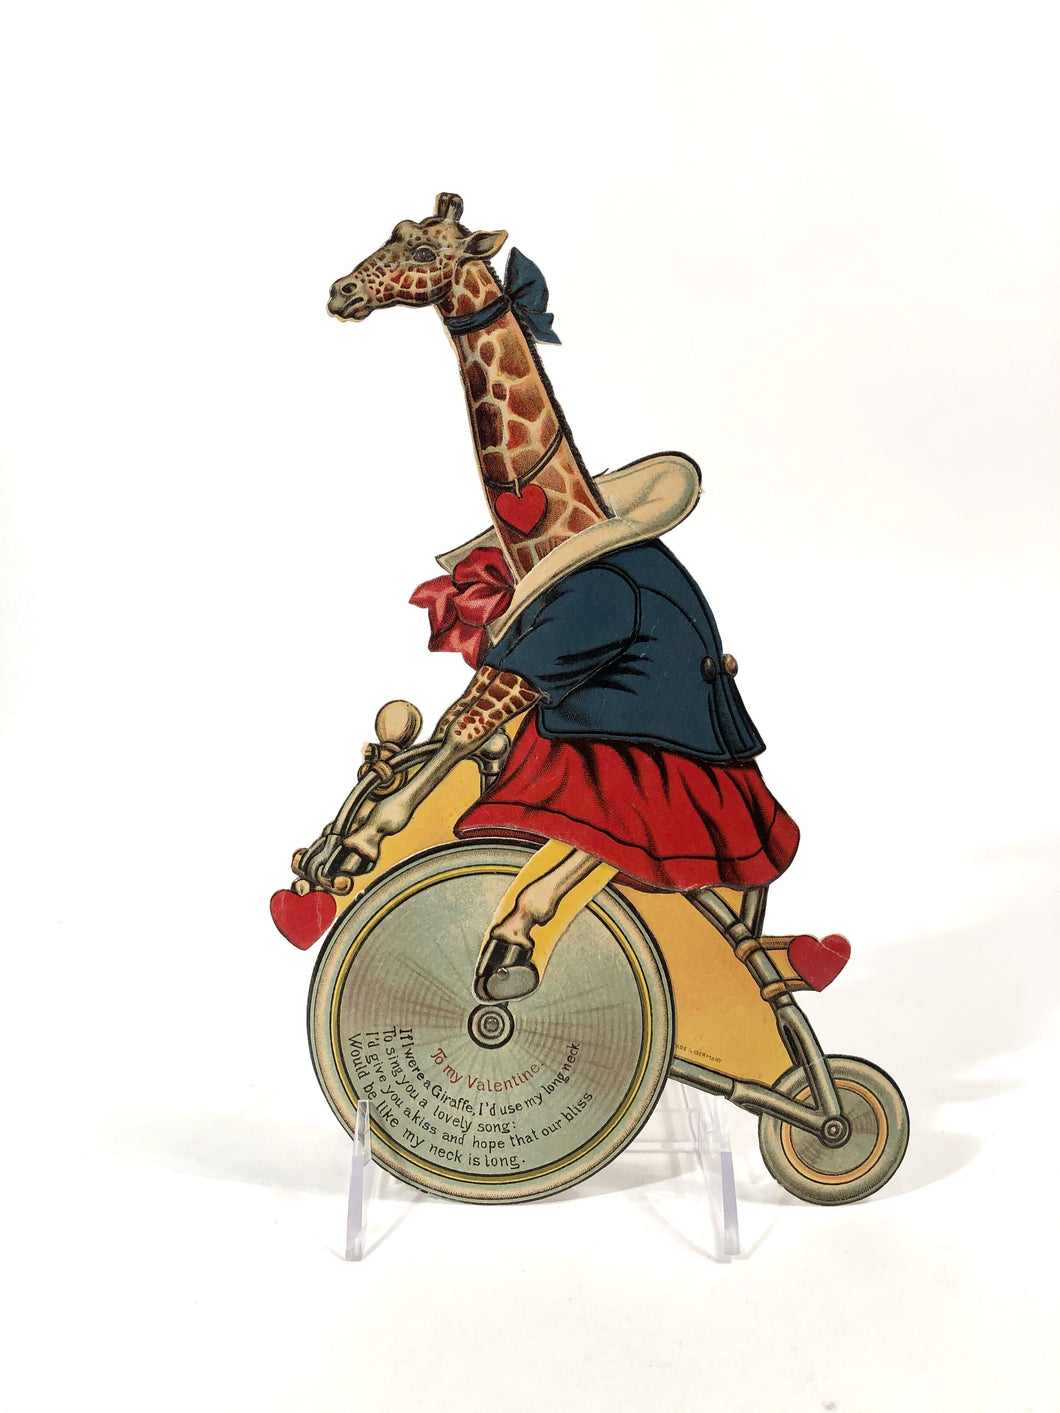 Antique Rare MECHANICAL German-Made VALENTINE || Anthropomorphic Giraffe on a Bicycle